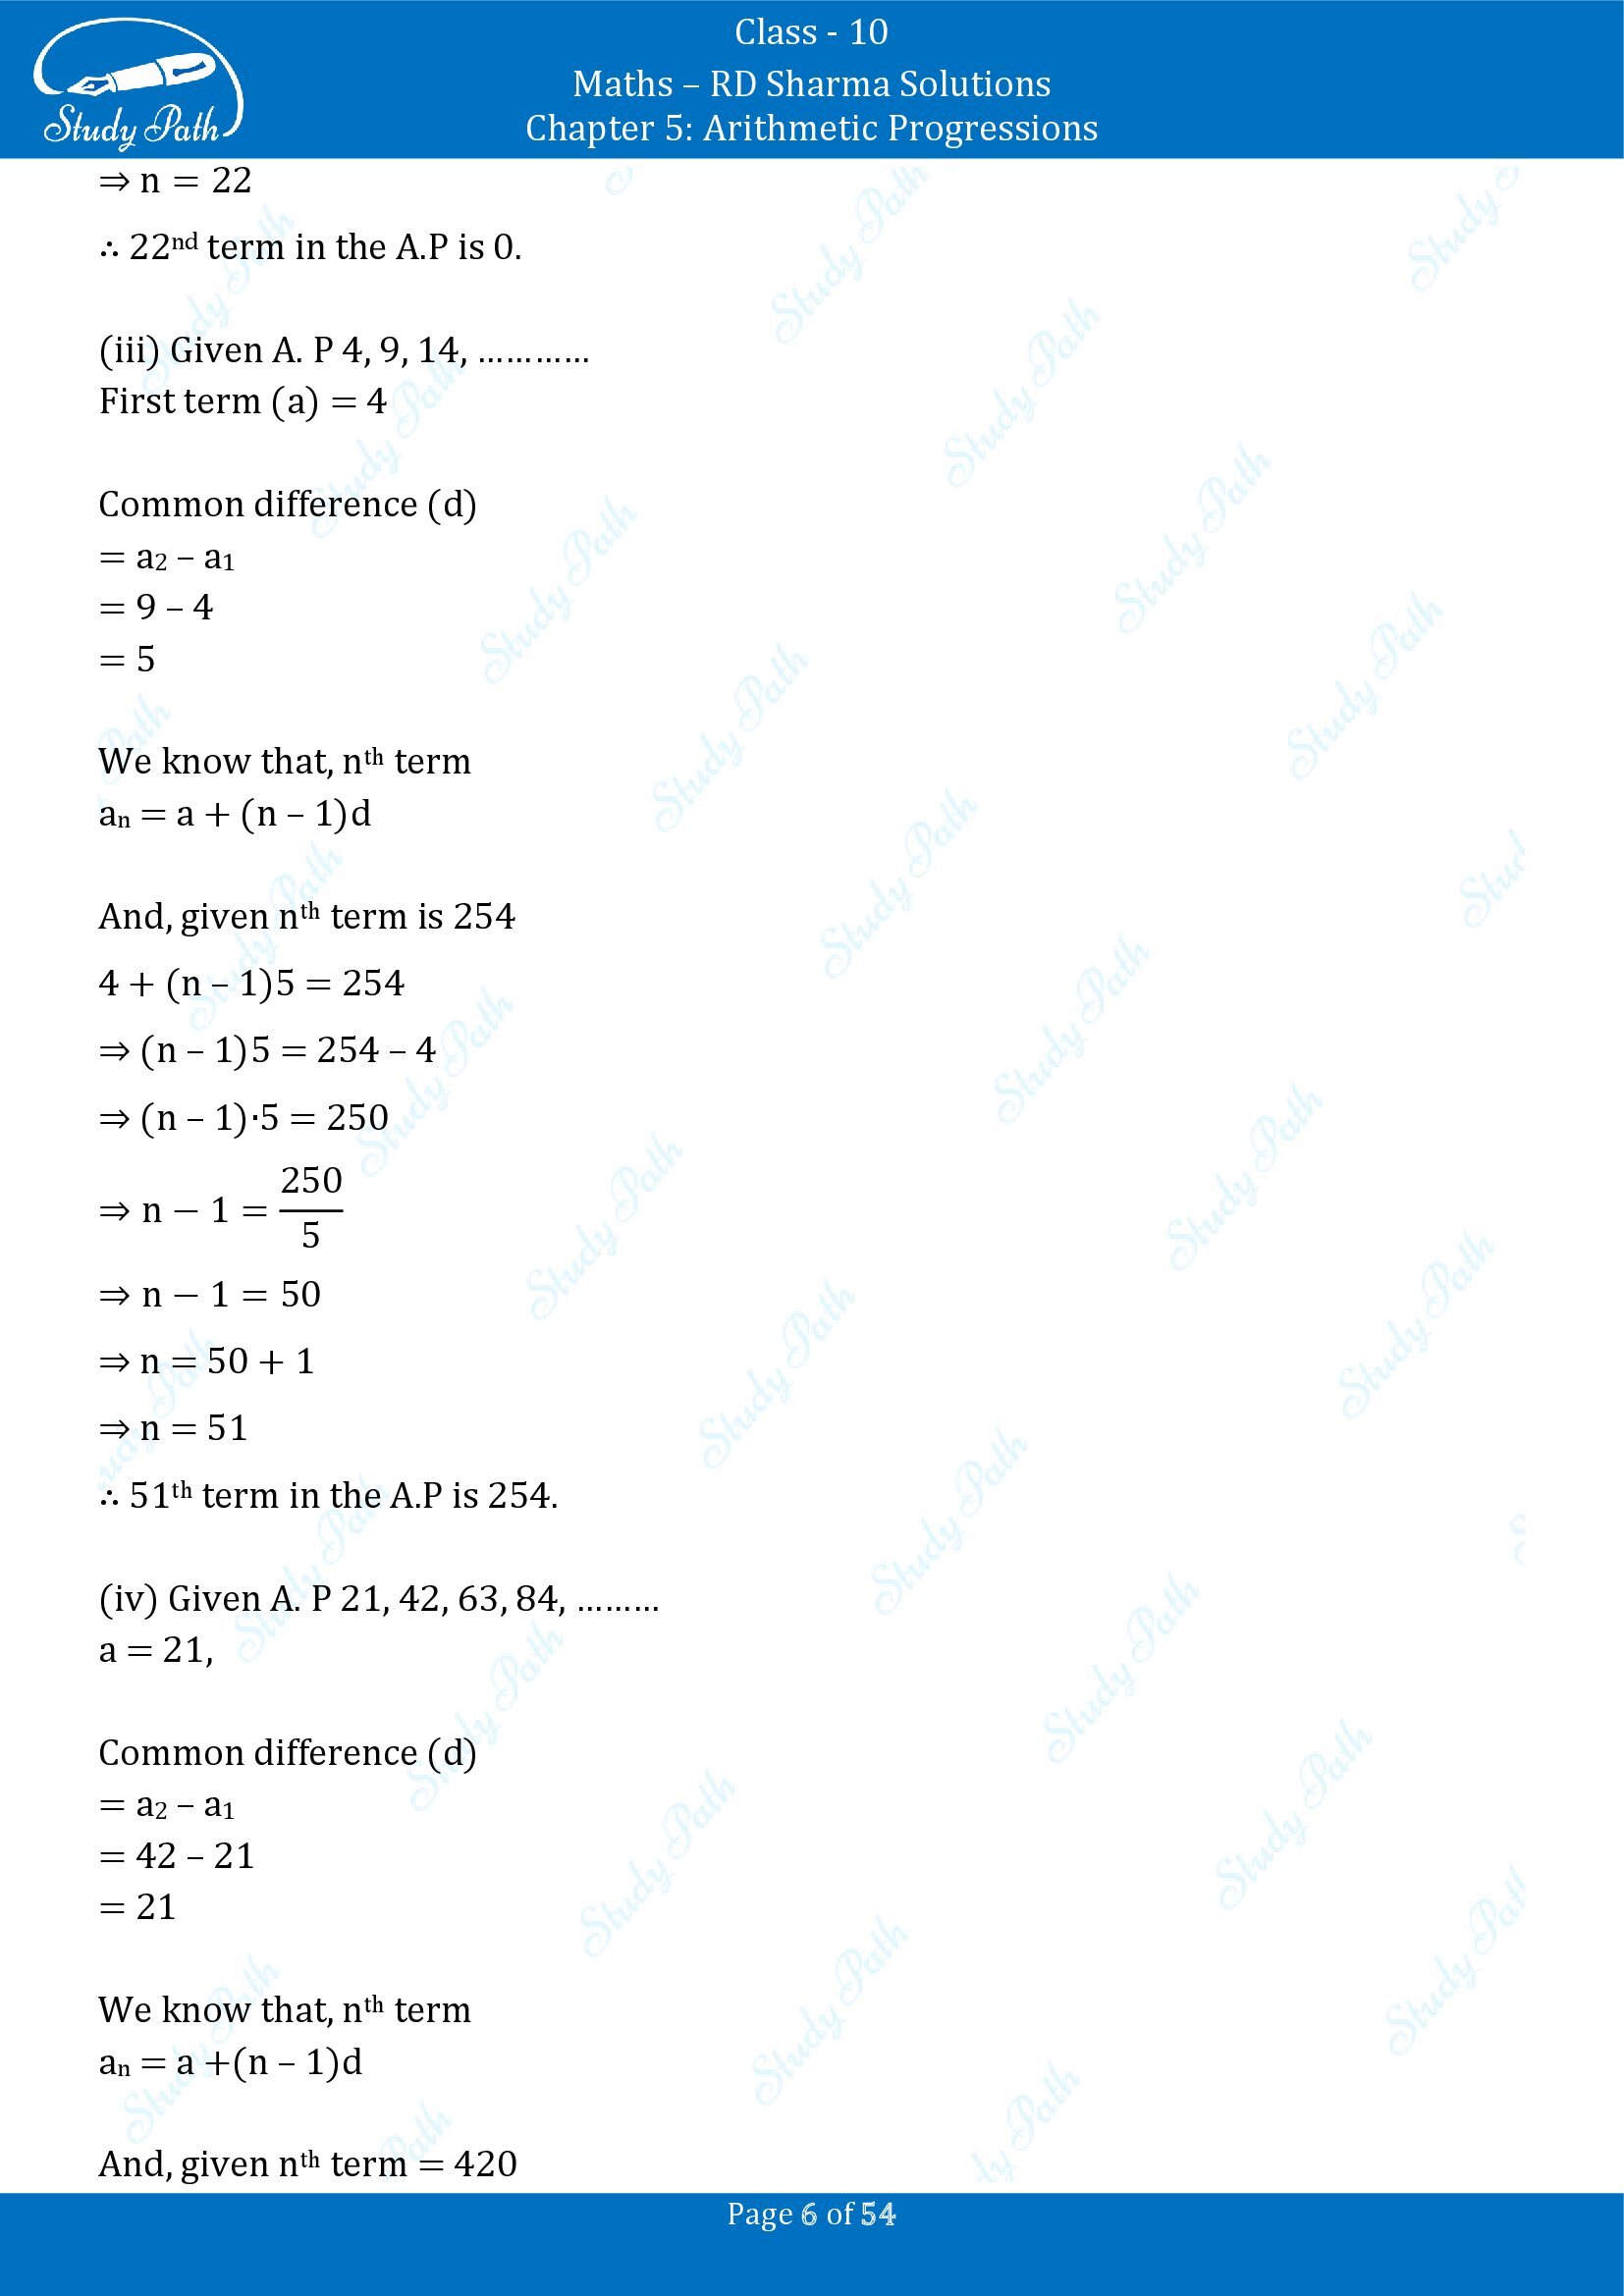 RD Sharma Solutions Class 10 Chapter 5 Arithmetic Progressions Exercise 5.4 00006